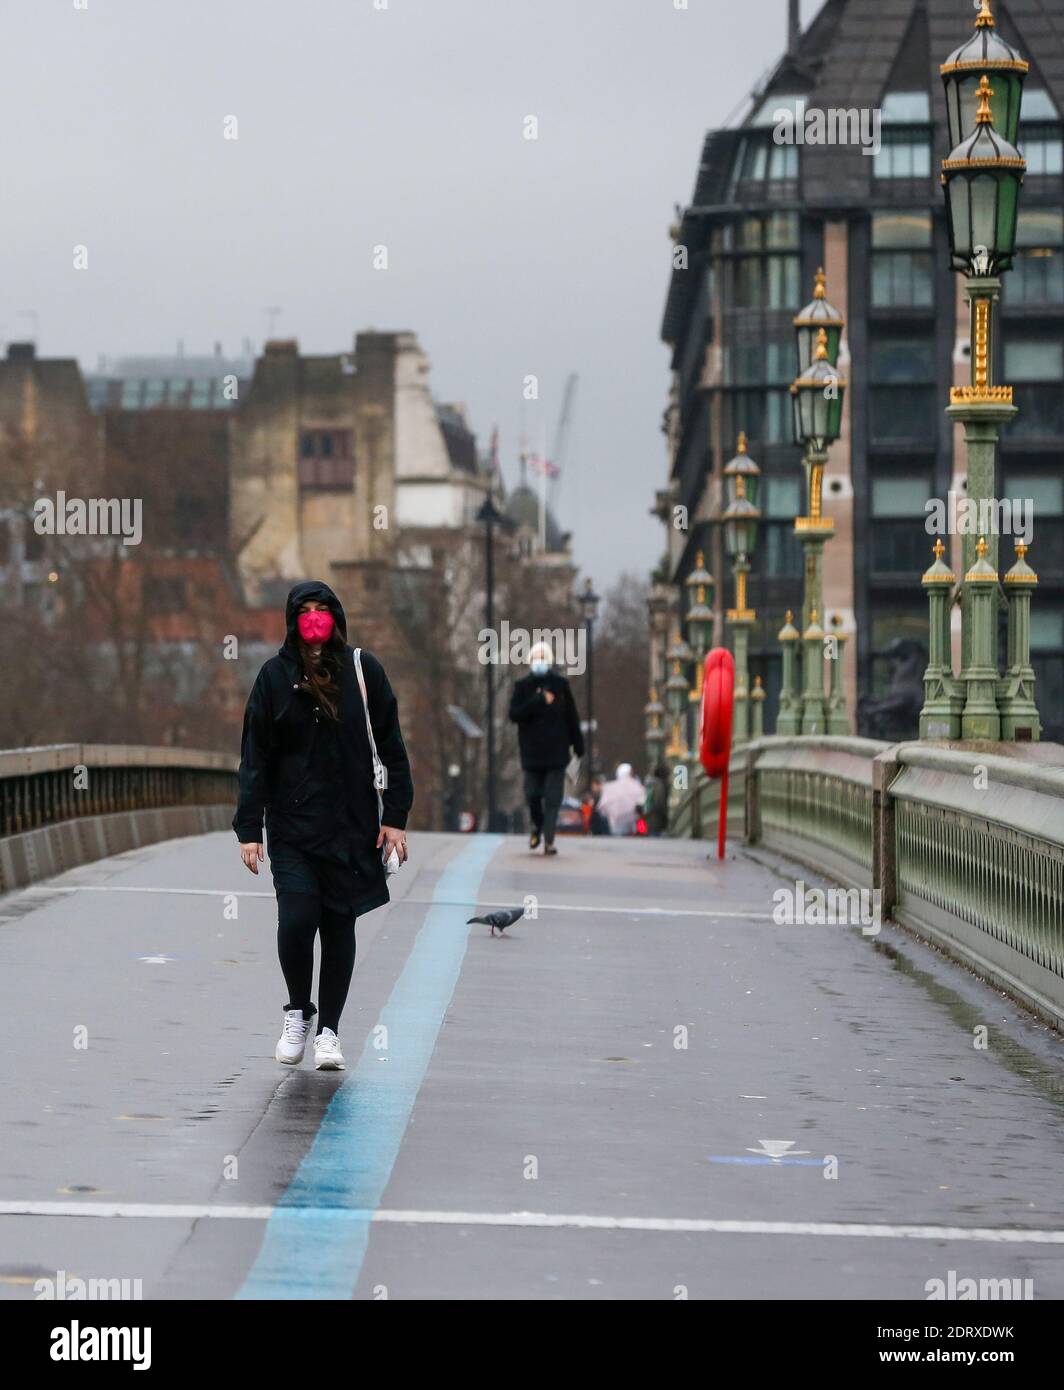 London, UK. 21st Dec, 2020. People walk along Westminster Bridge in London, Britain on Dec. 21, 2020. On Sunday, British Health Secretary Matt Hancock warned that the new strain of COVID-19 is 'out of control' in Britain, urging Britons to behave as if they already have the virus, especially in areas under the new Tier Four restrictions. Credit: Han Yan/Xinhua/Alamy Live News Stock Photo